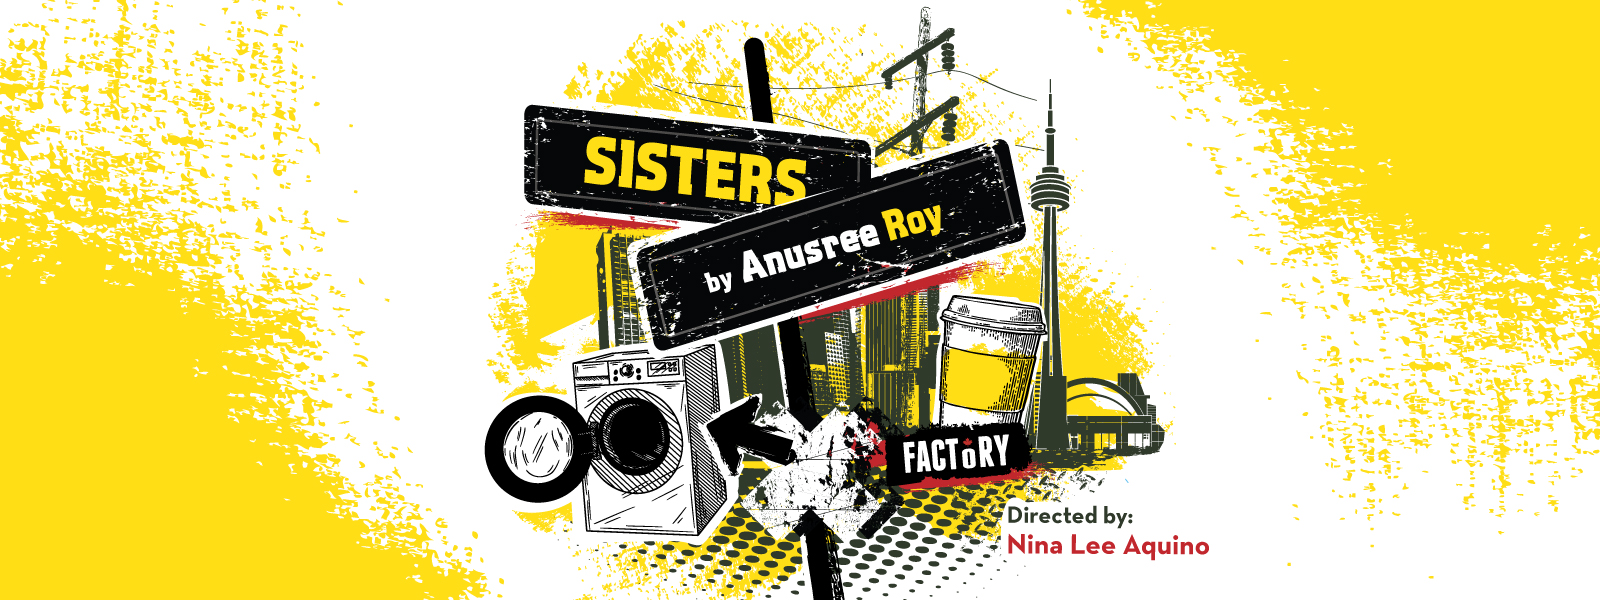 Sisters show poster